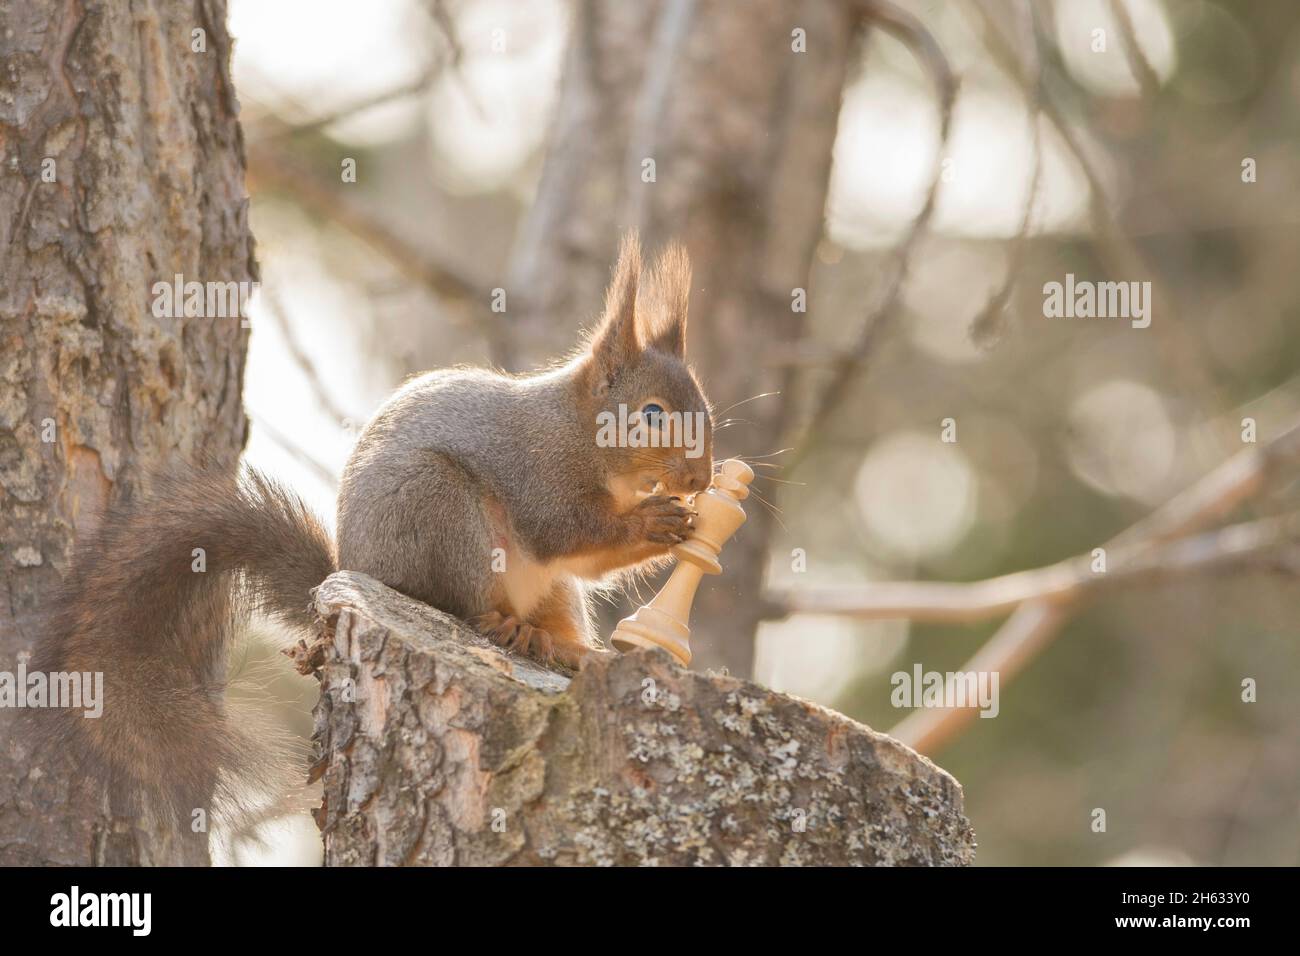 close up of red squirrel in tree with a chess piece in hands Stock Photo